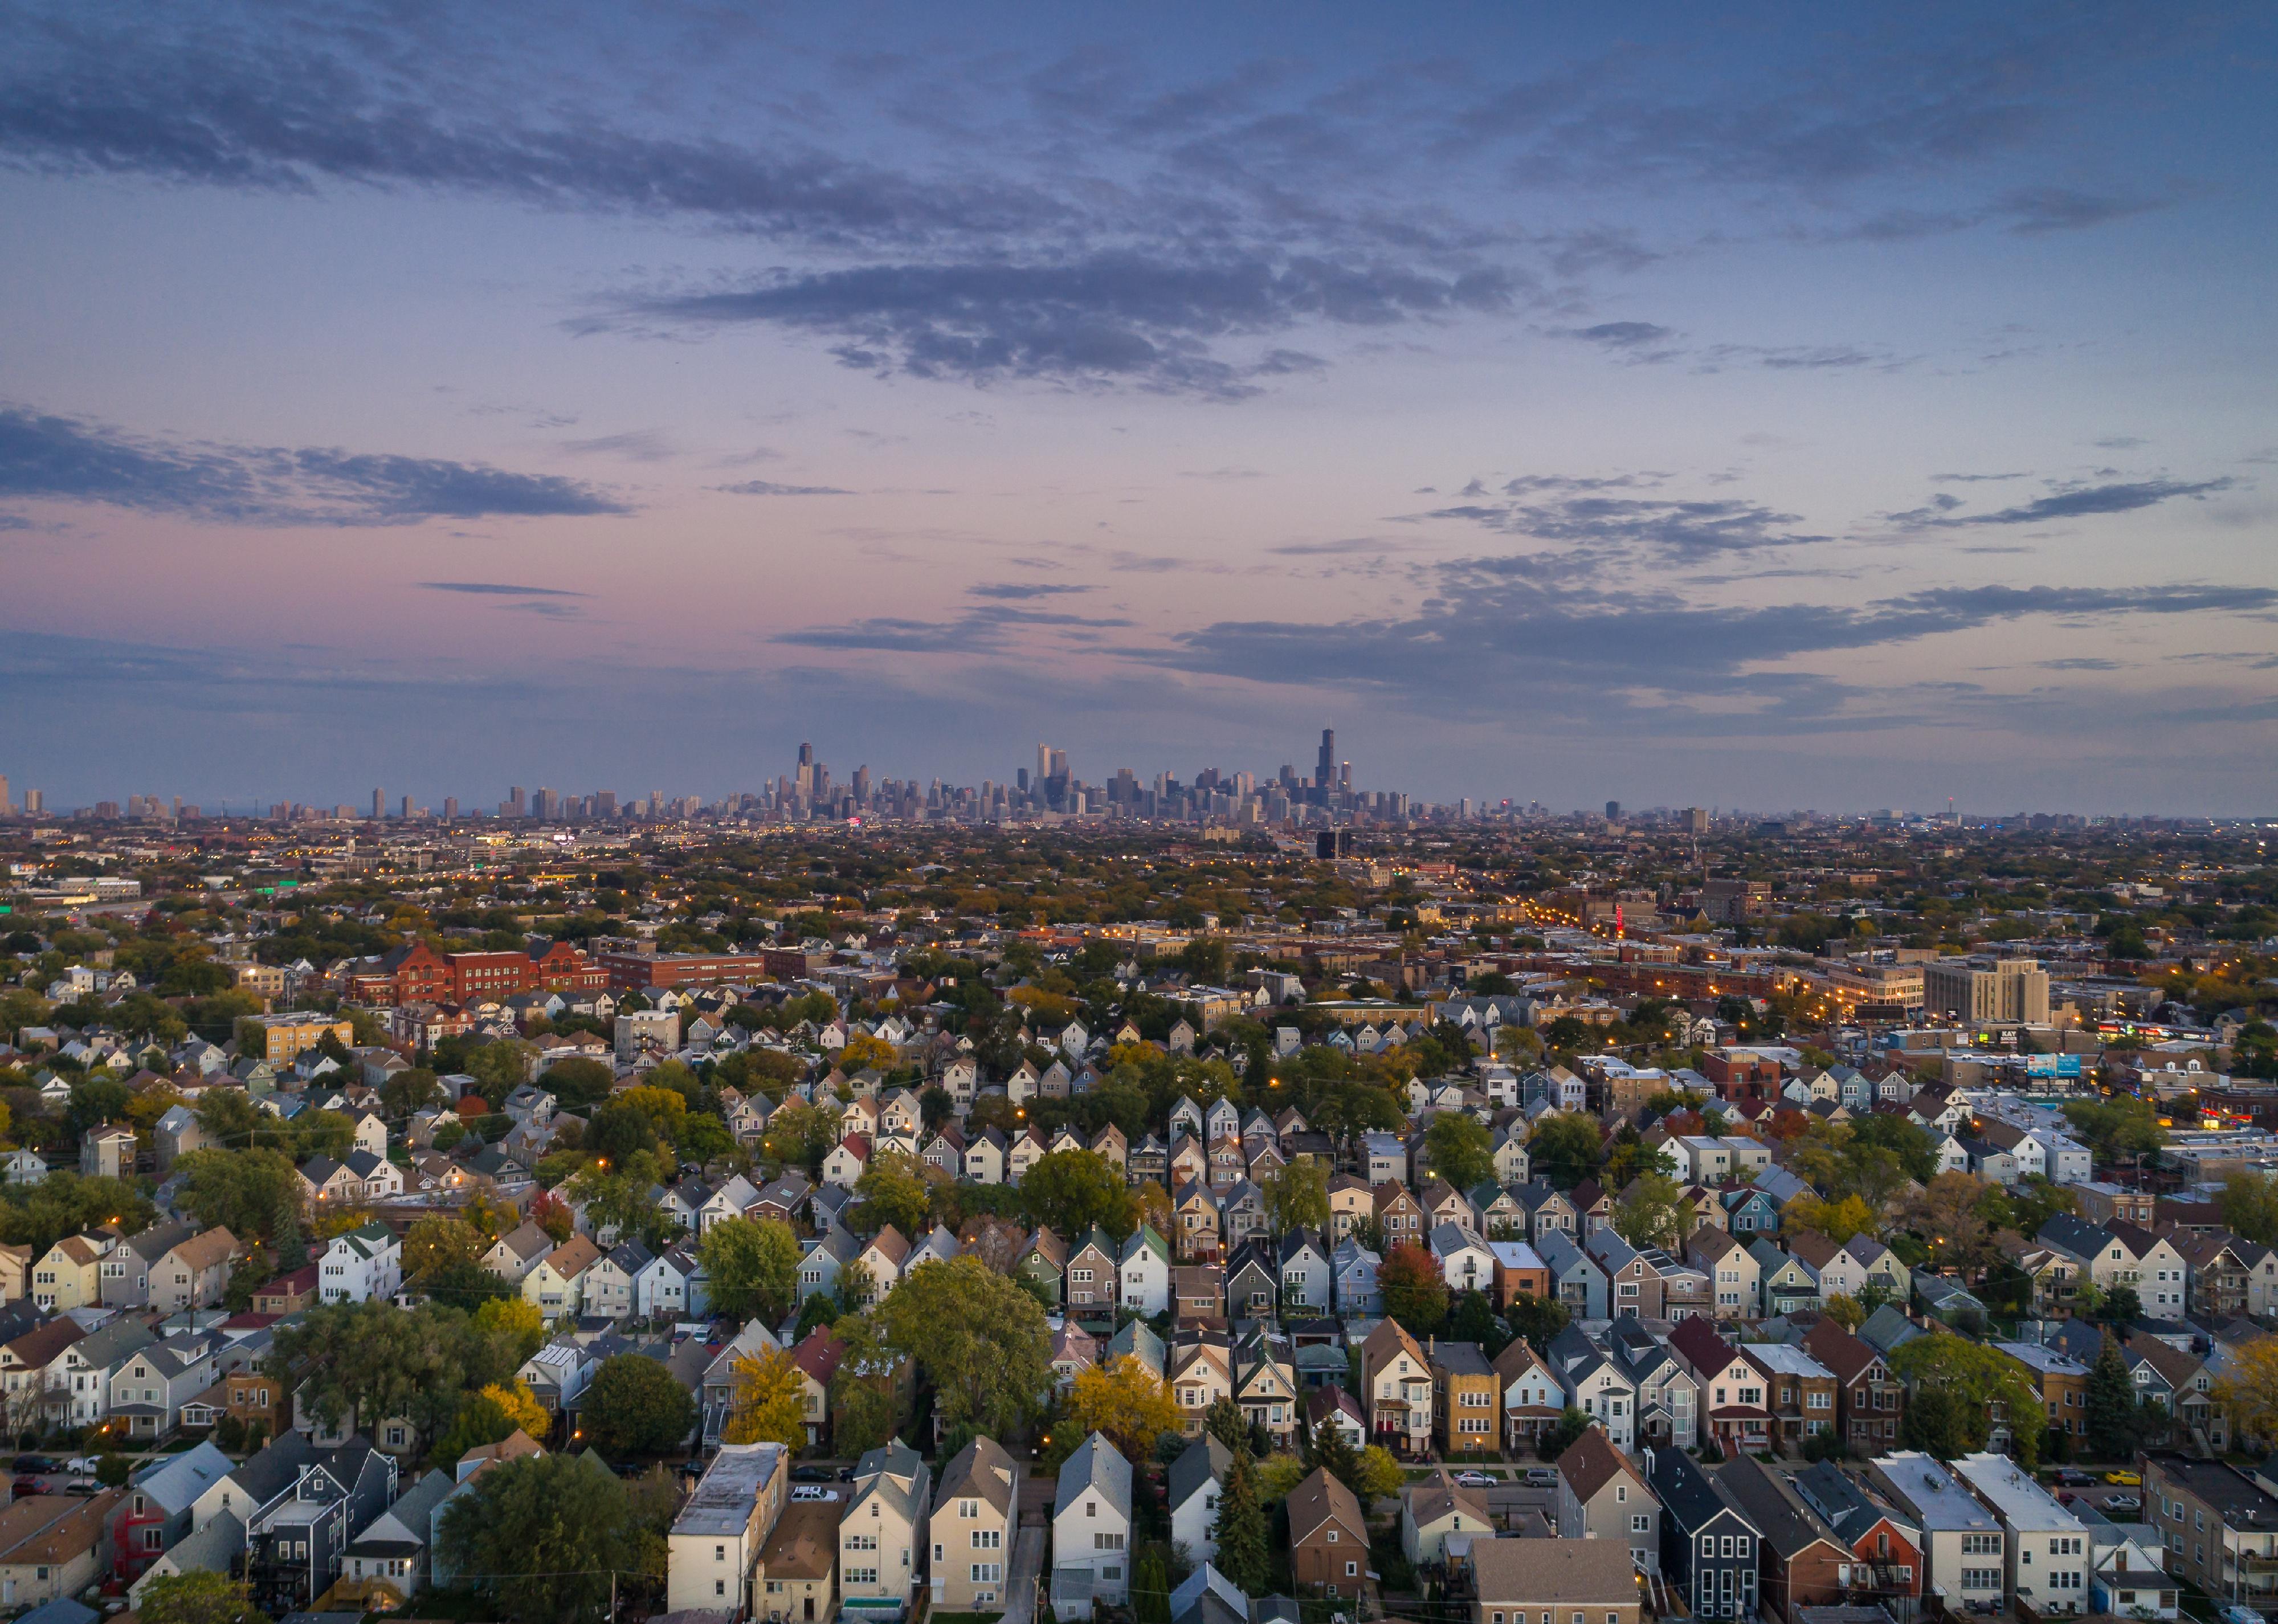 Chicago suburbs, after sunset, overlooking downtown.